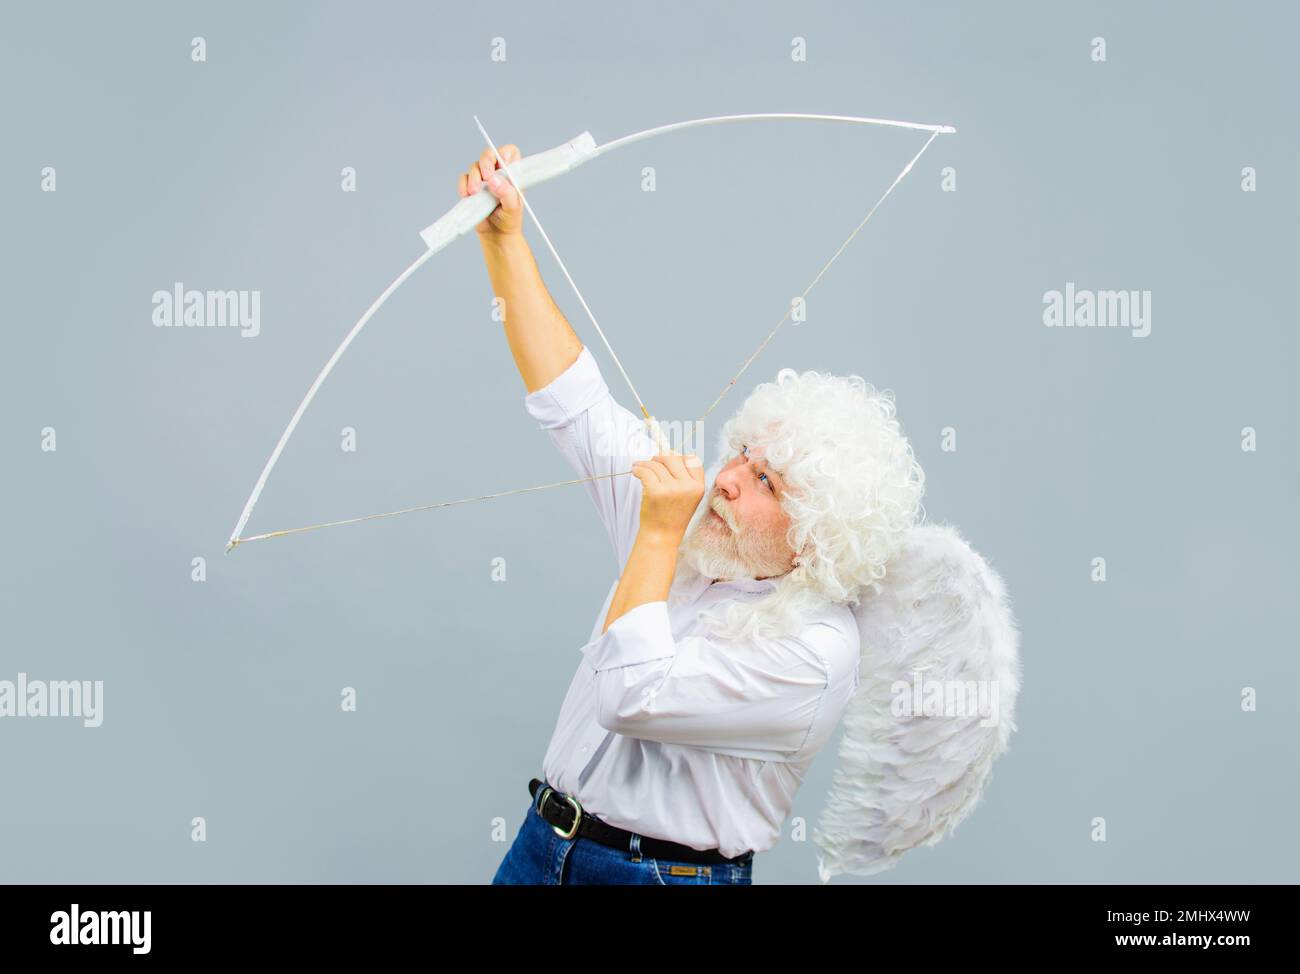 Male angel aiming up with bow and arrow. February 14. Saint Valentines Day. Arrows of love. Cupid. Stock Photo